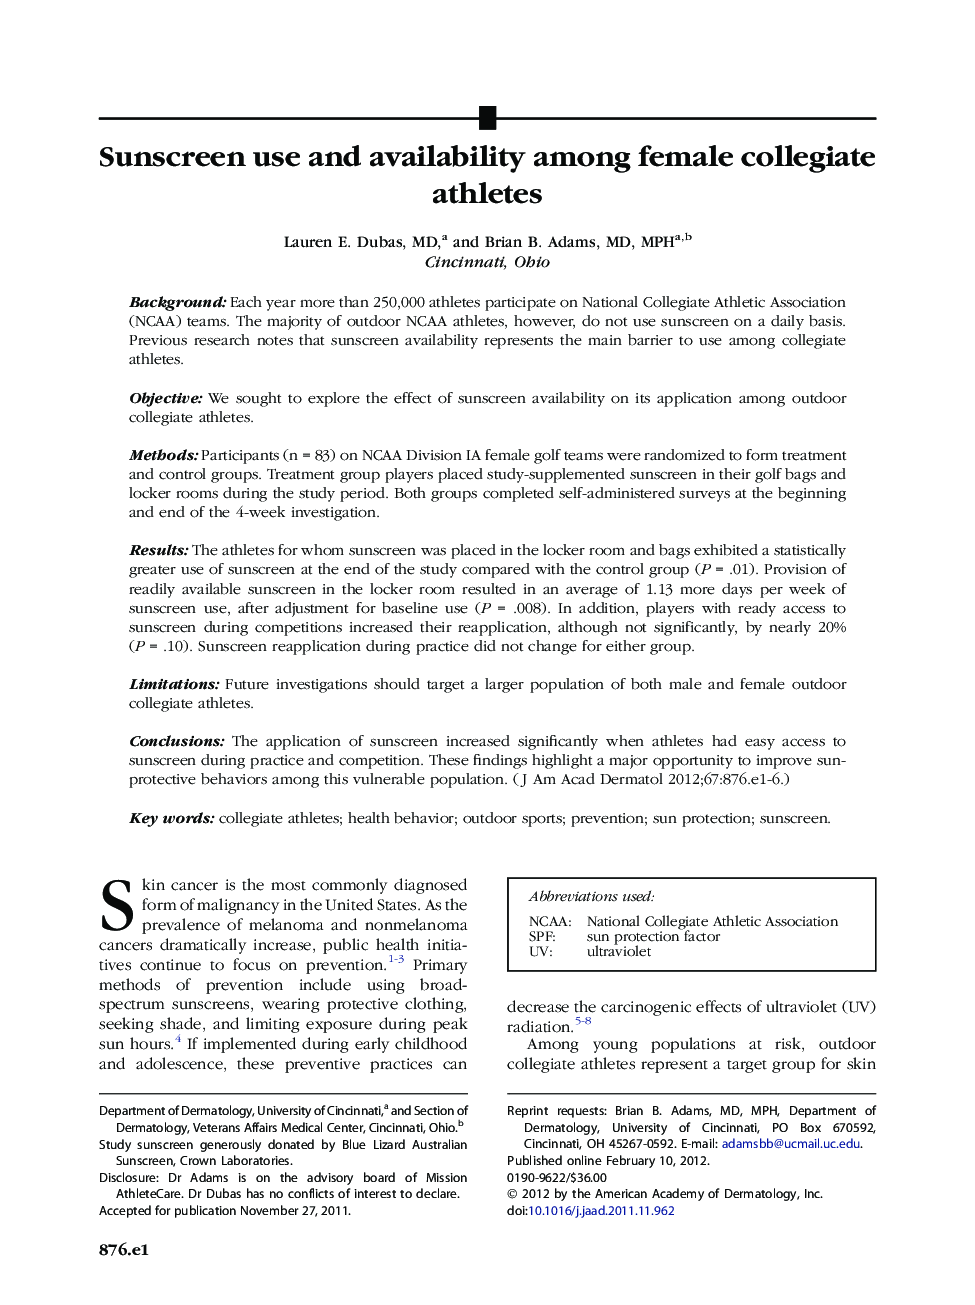 Sunscreen use and availability among female collegiate athletes